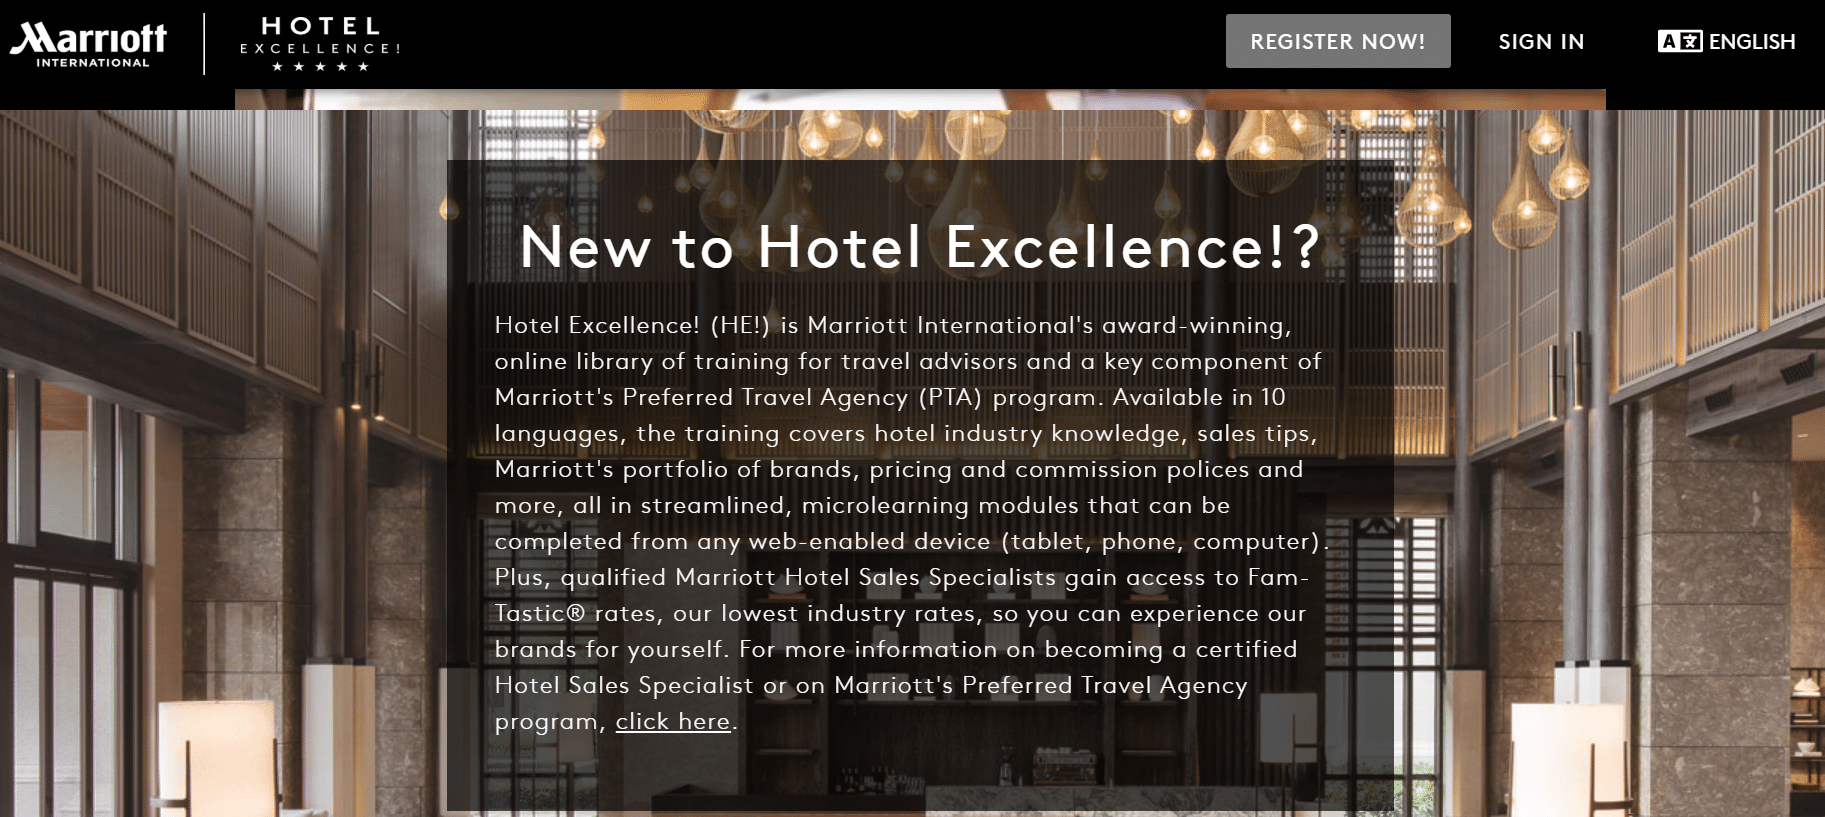 Marriott Hotel Excellence